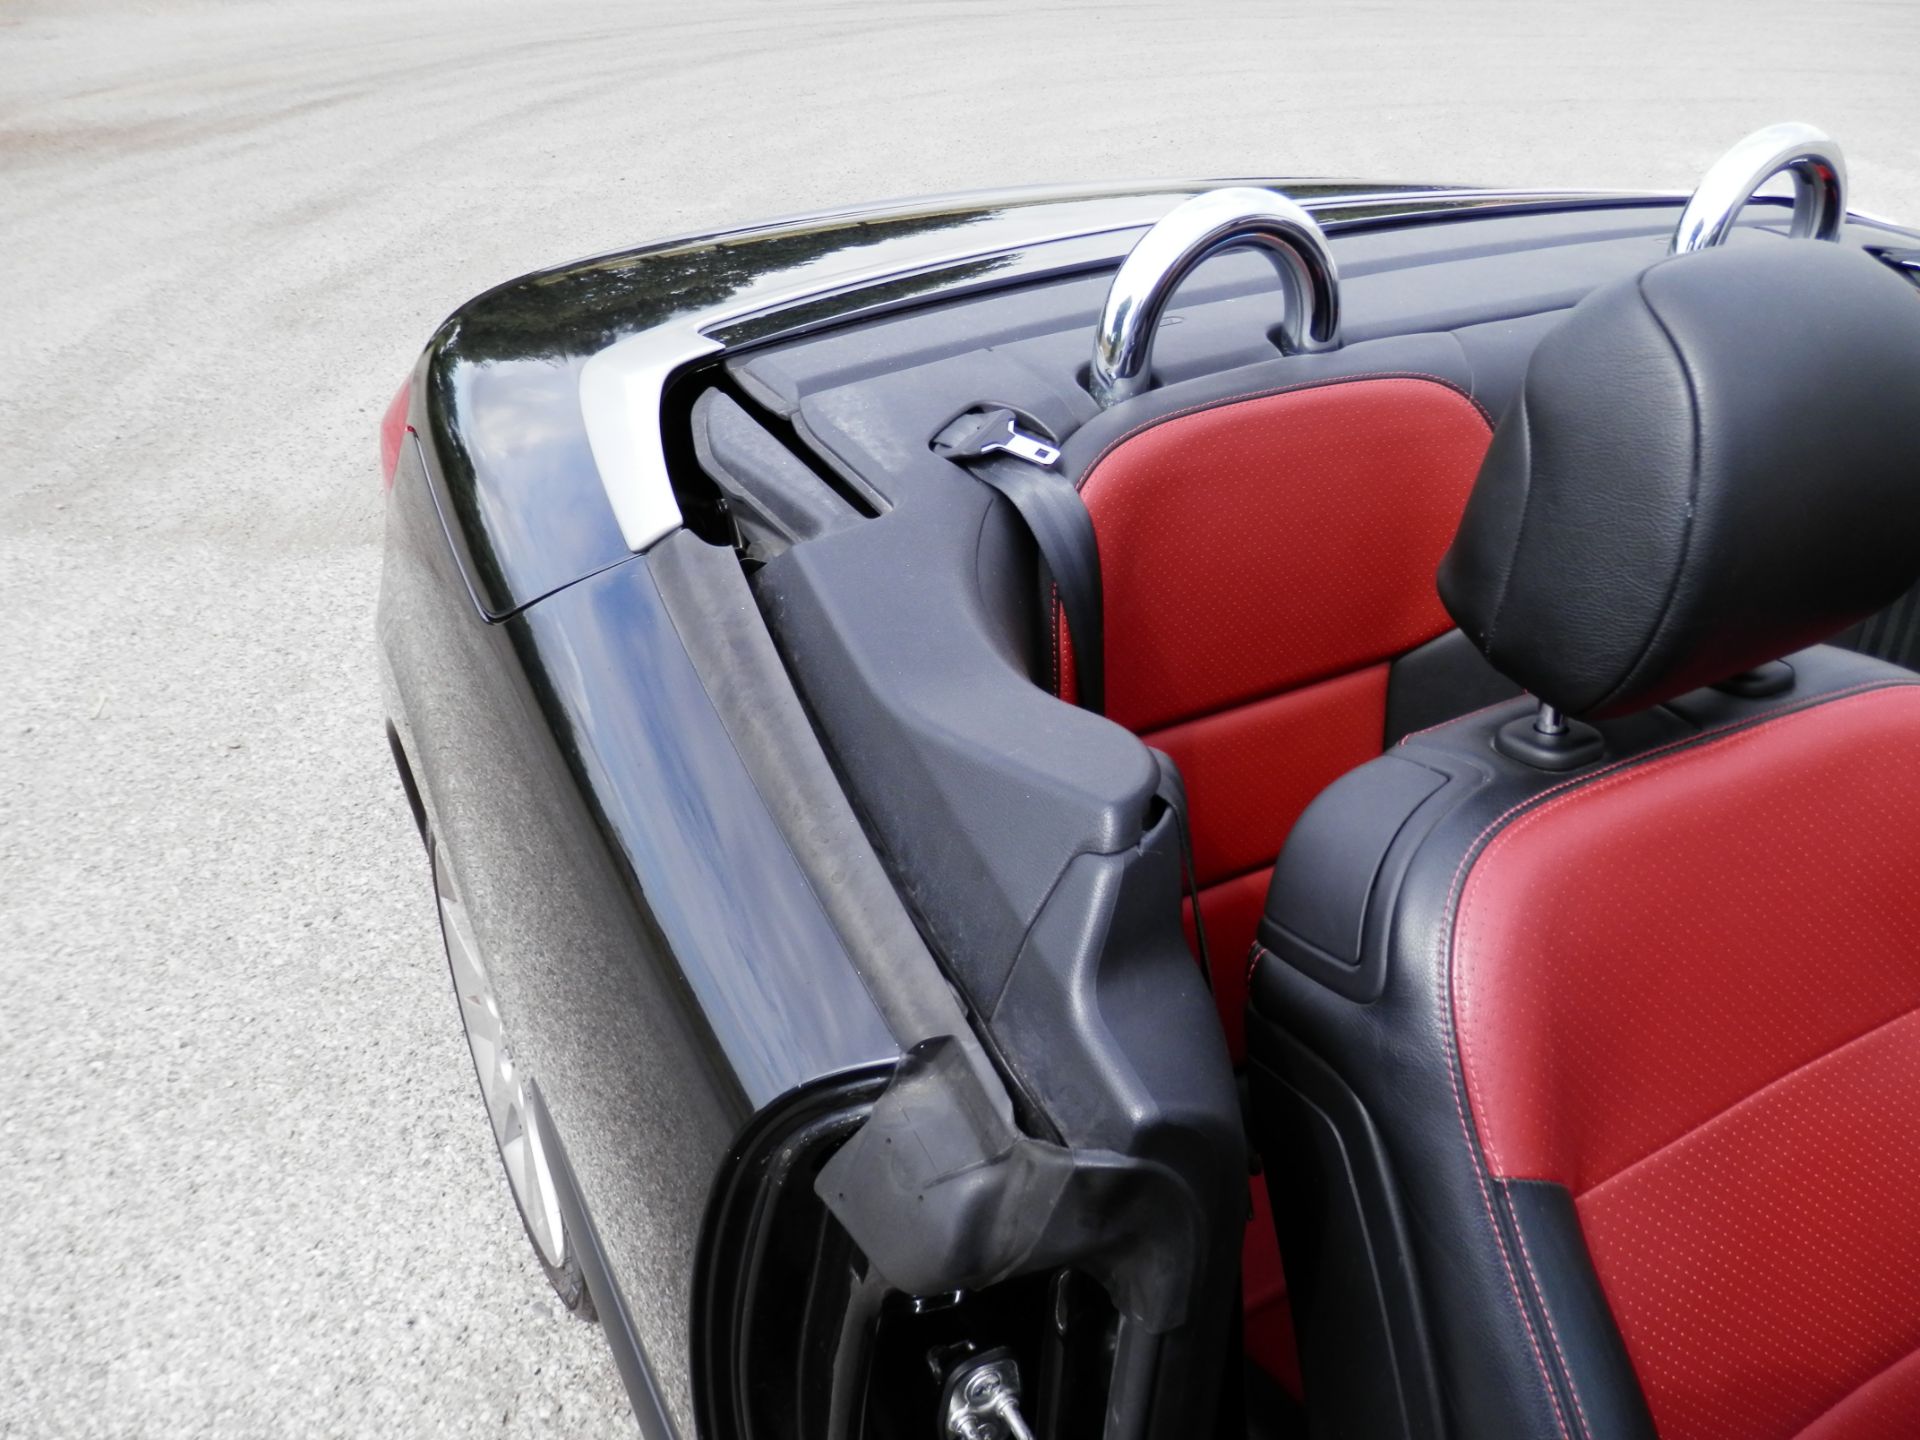 2007/07 PEUGEOT 207 COUPE CABRIOLET - 1.6 16V GT THP 2dr, WITH 2 TONE BLACK & READ LEATHER INTERIOR. - Image 21 of 31